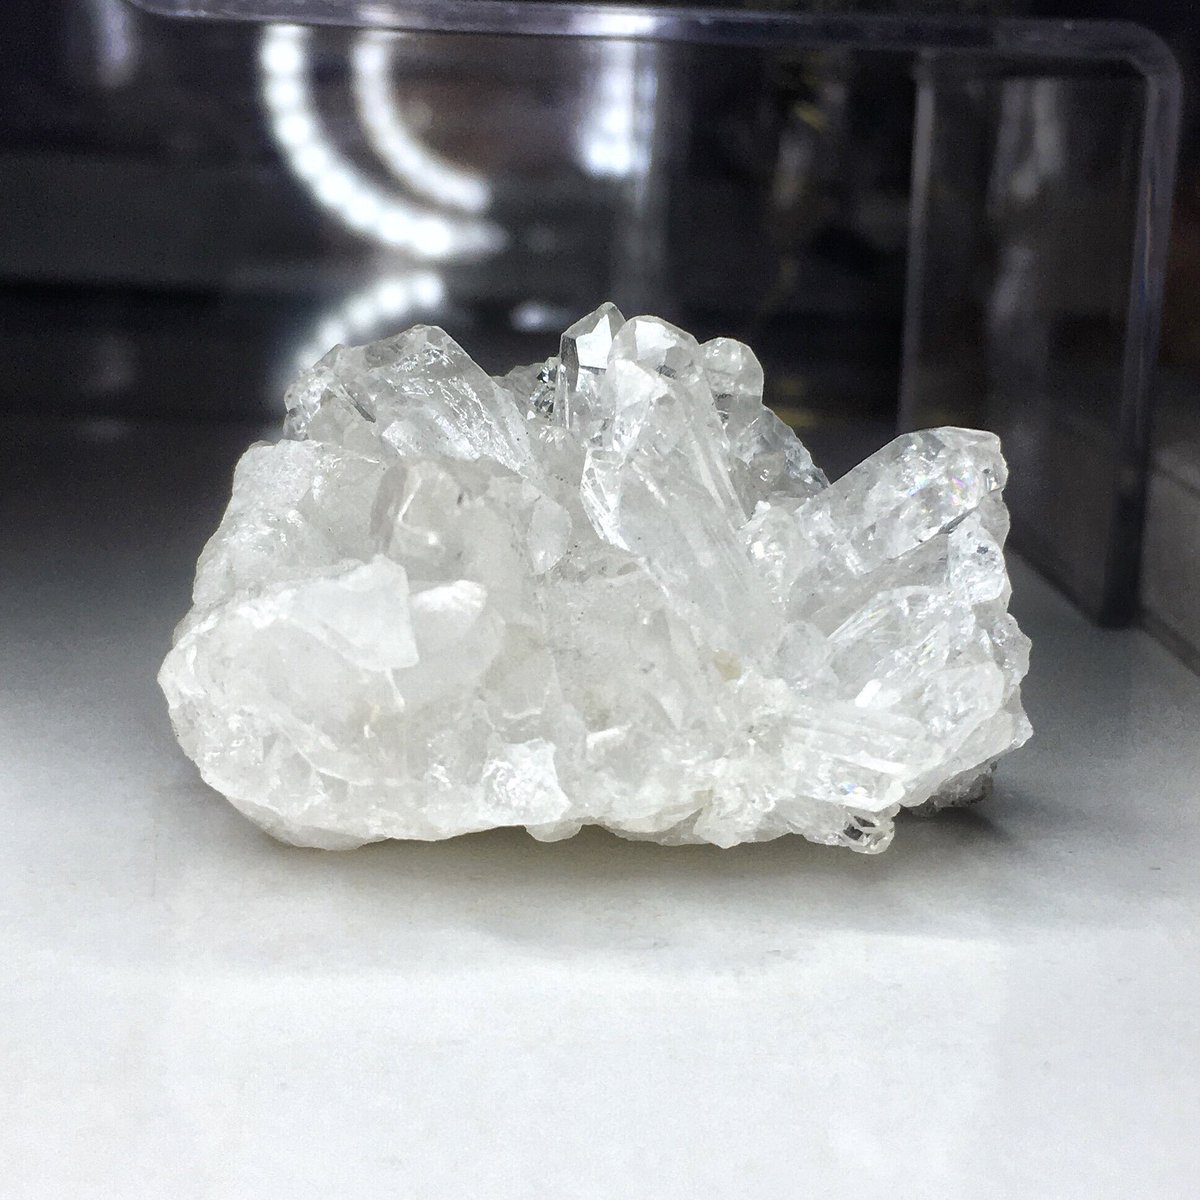 Beautiful clear Quartz cluster ❤️ had to share

#crystalcollector #crystalreiki